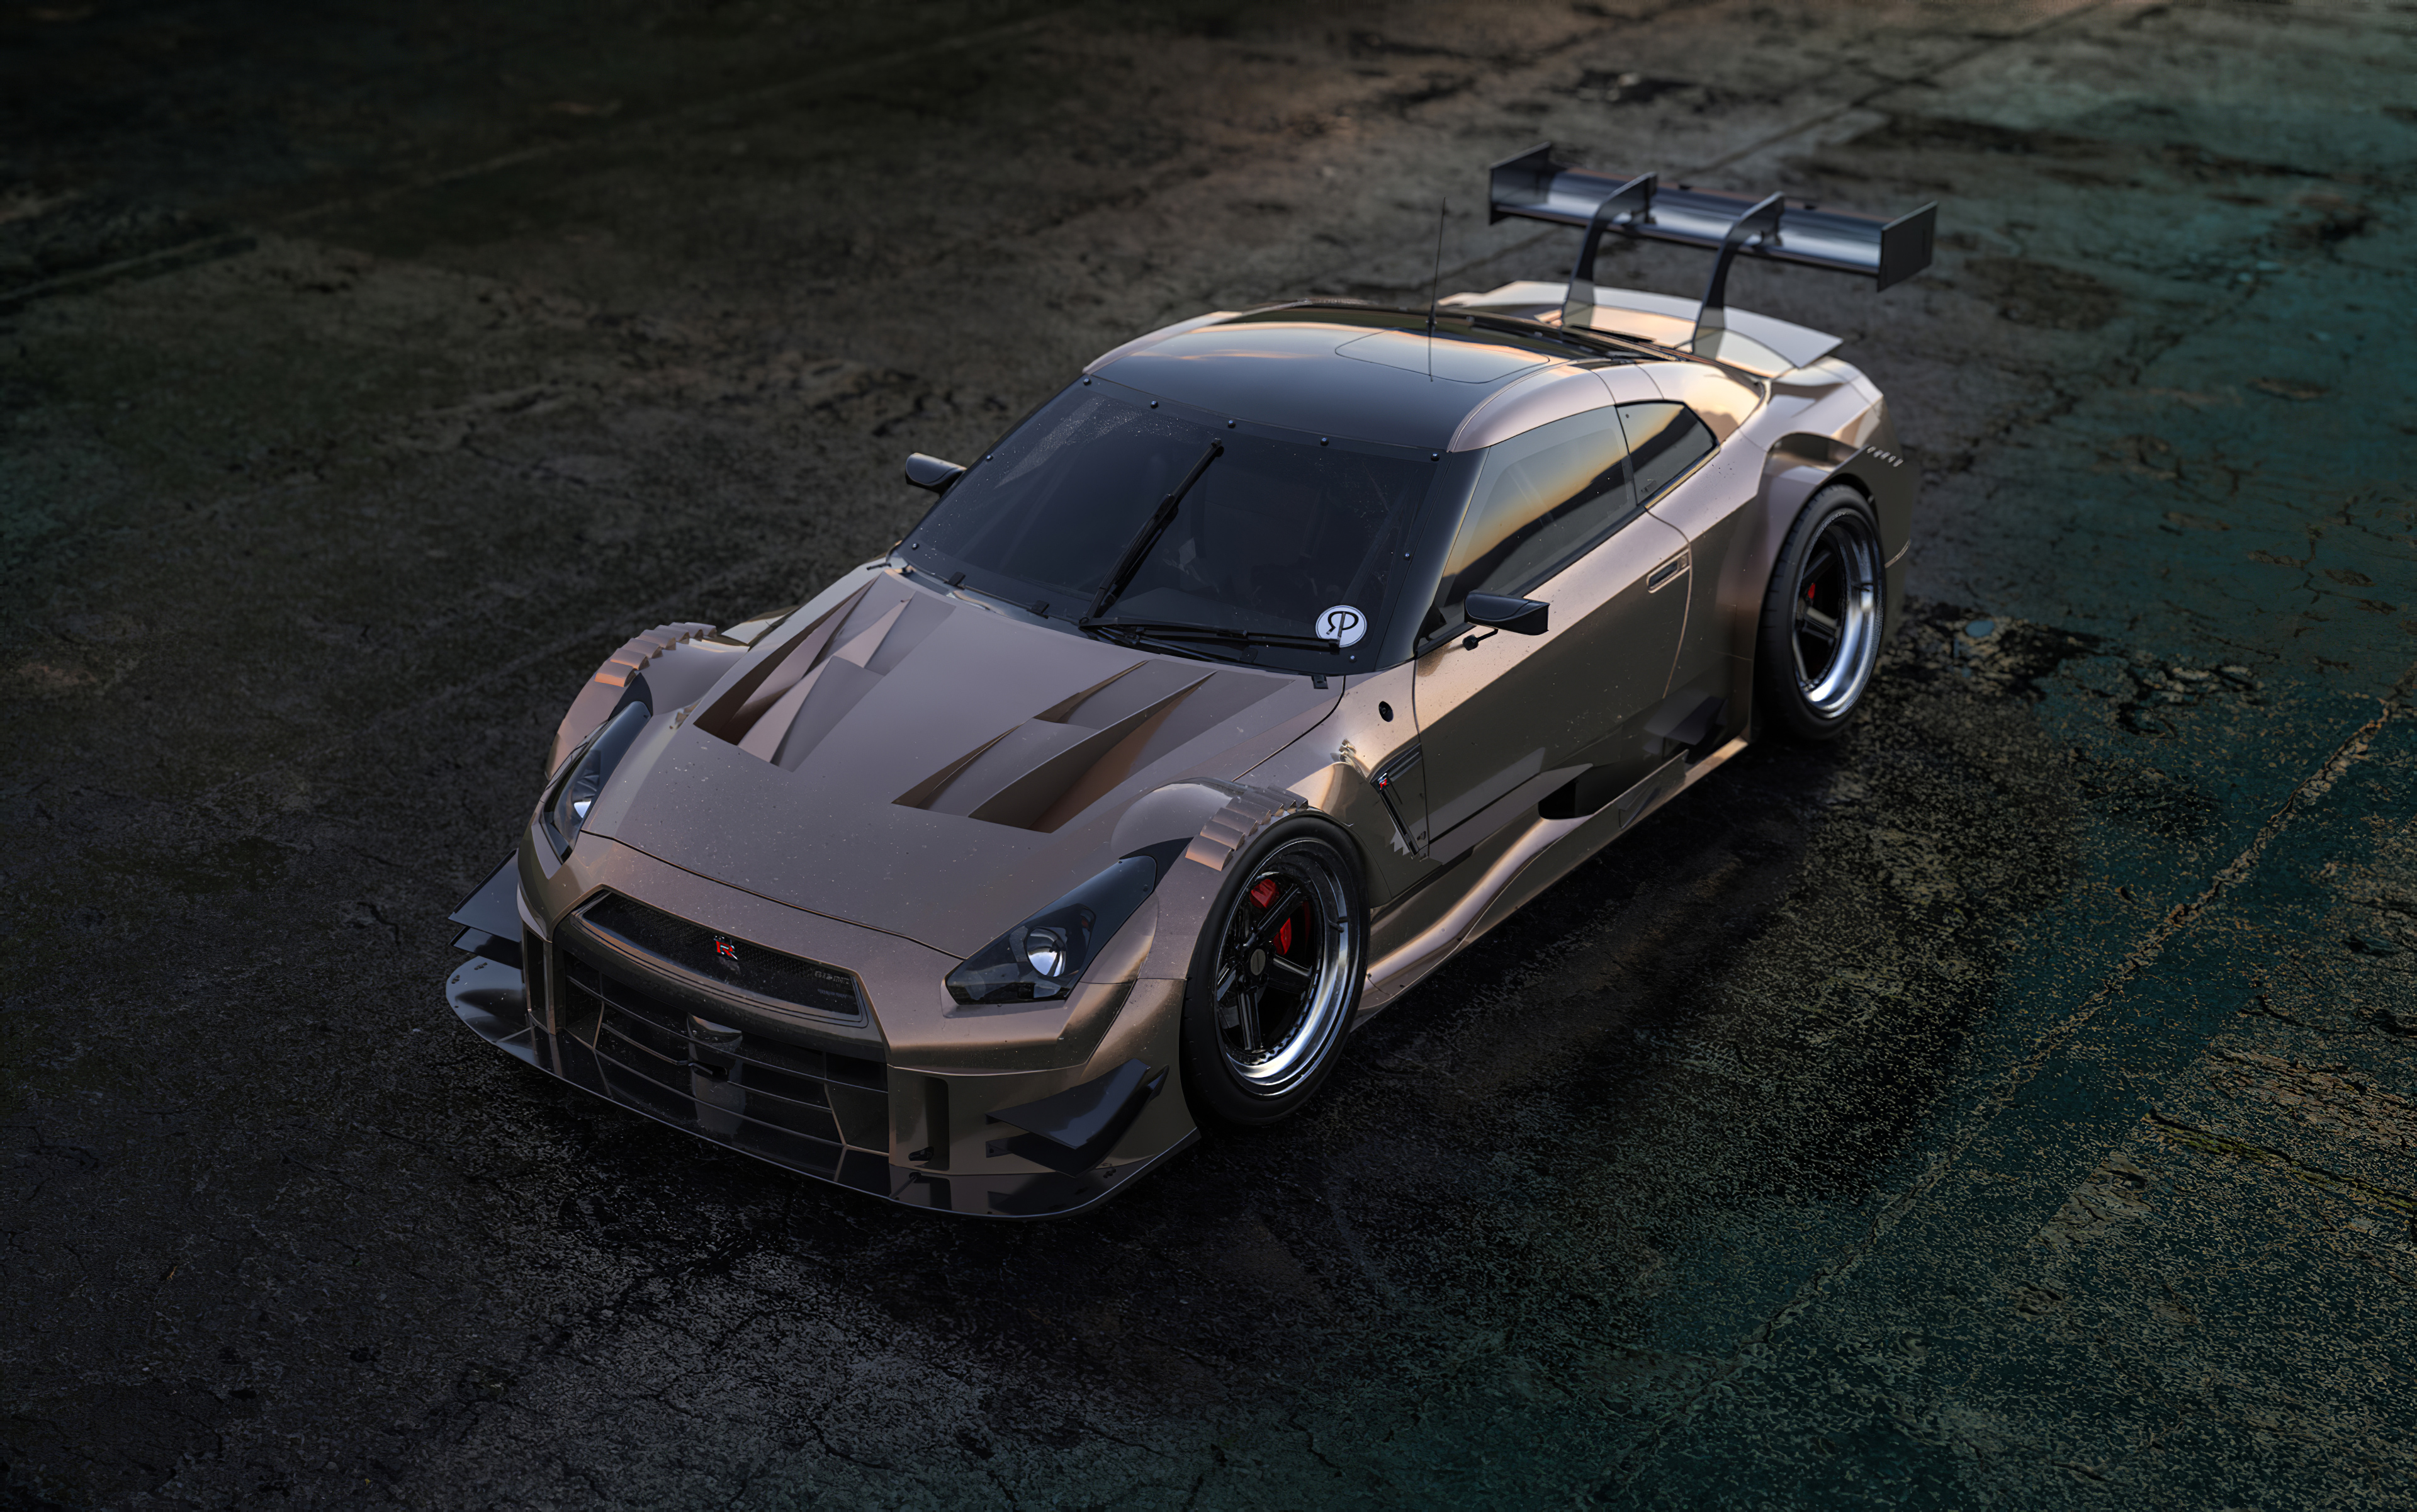 Nissan GTR Nismo 2020 4k, HD Cars, 4k Wallpapers, Images